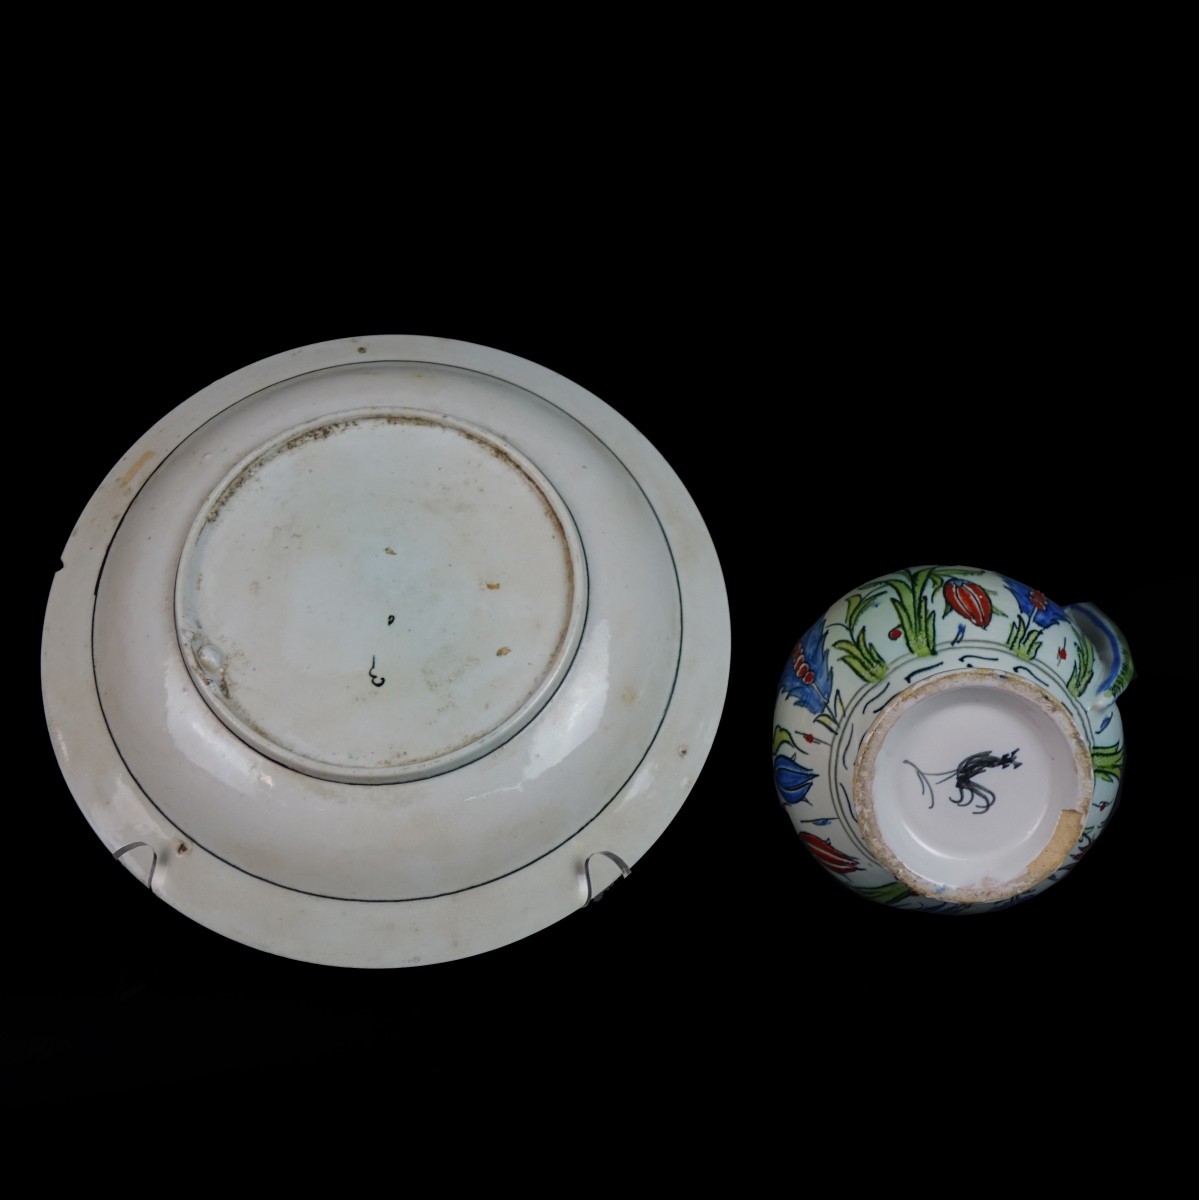 Two (2) Vintage Ottoman Empire Style Tableware